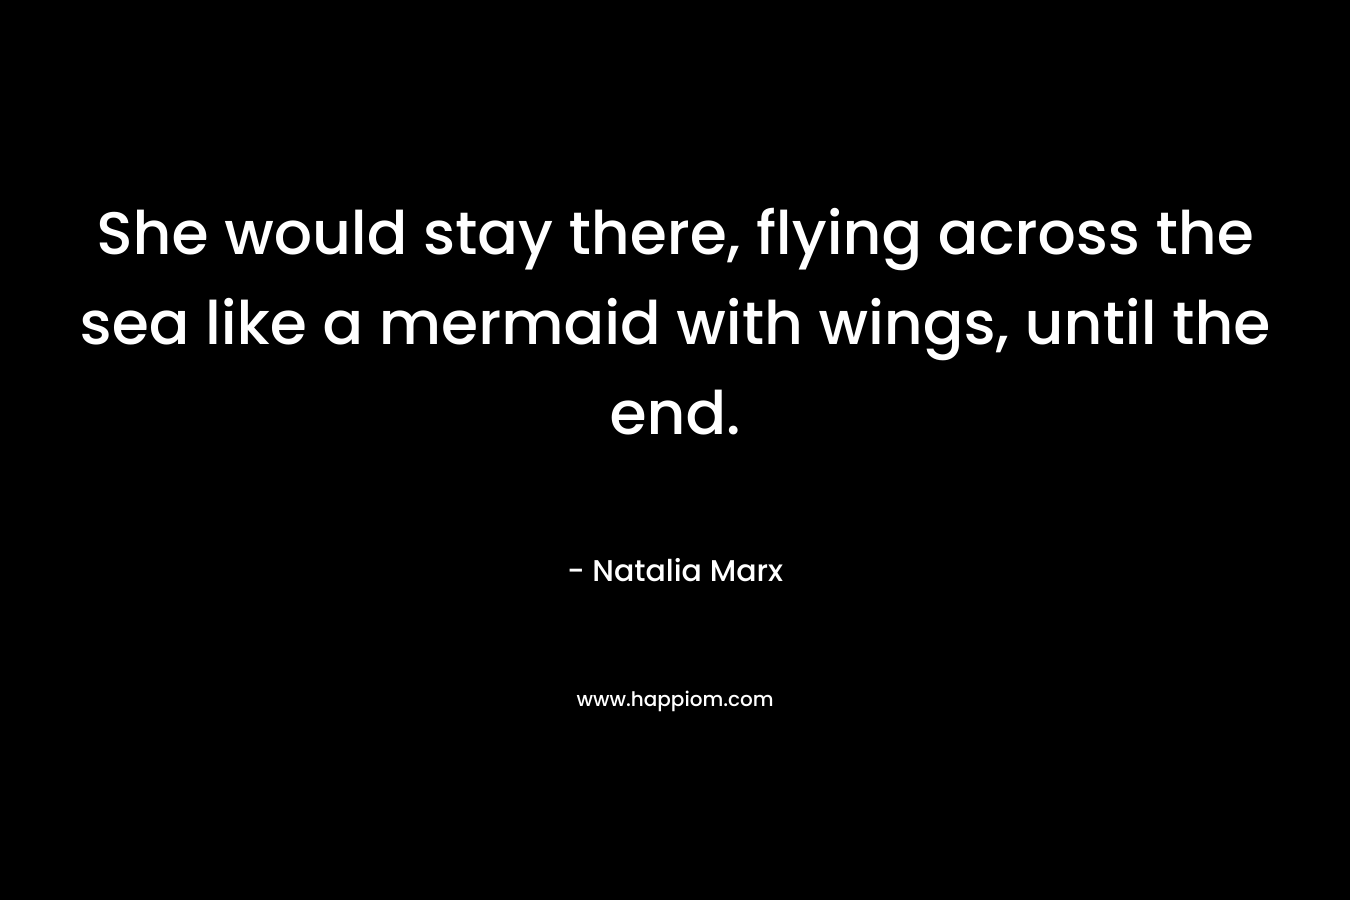 She would stay there, flying across the sea like a mermaid with wings, until the end.